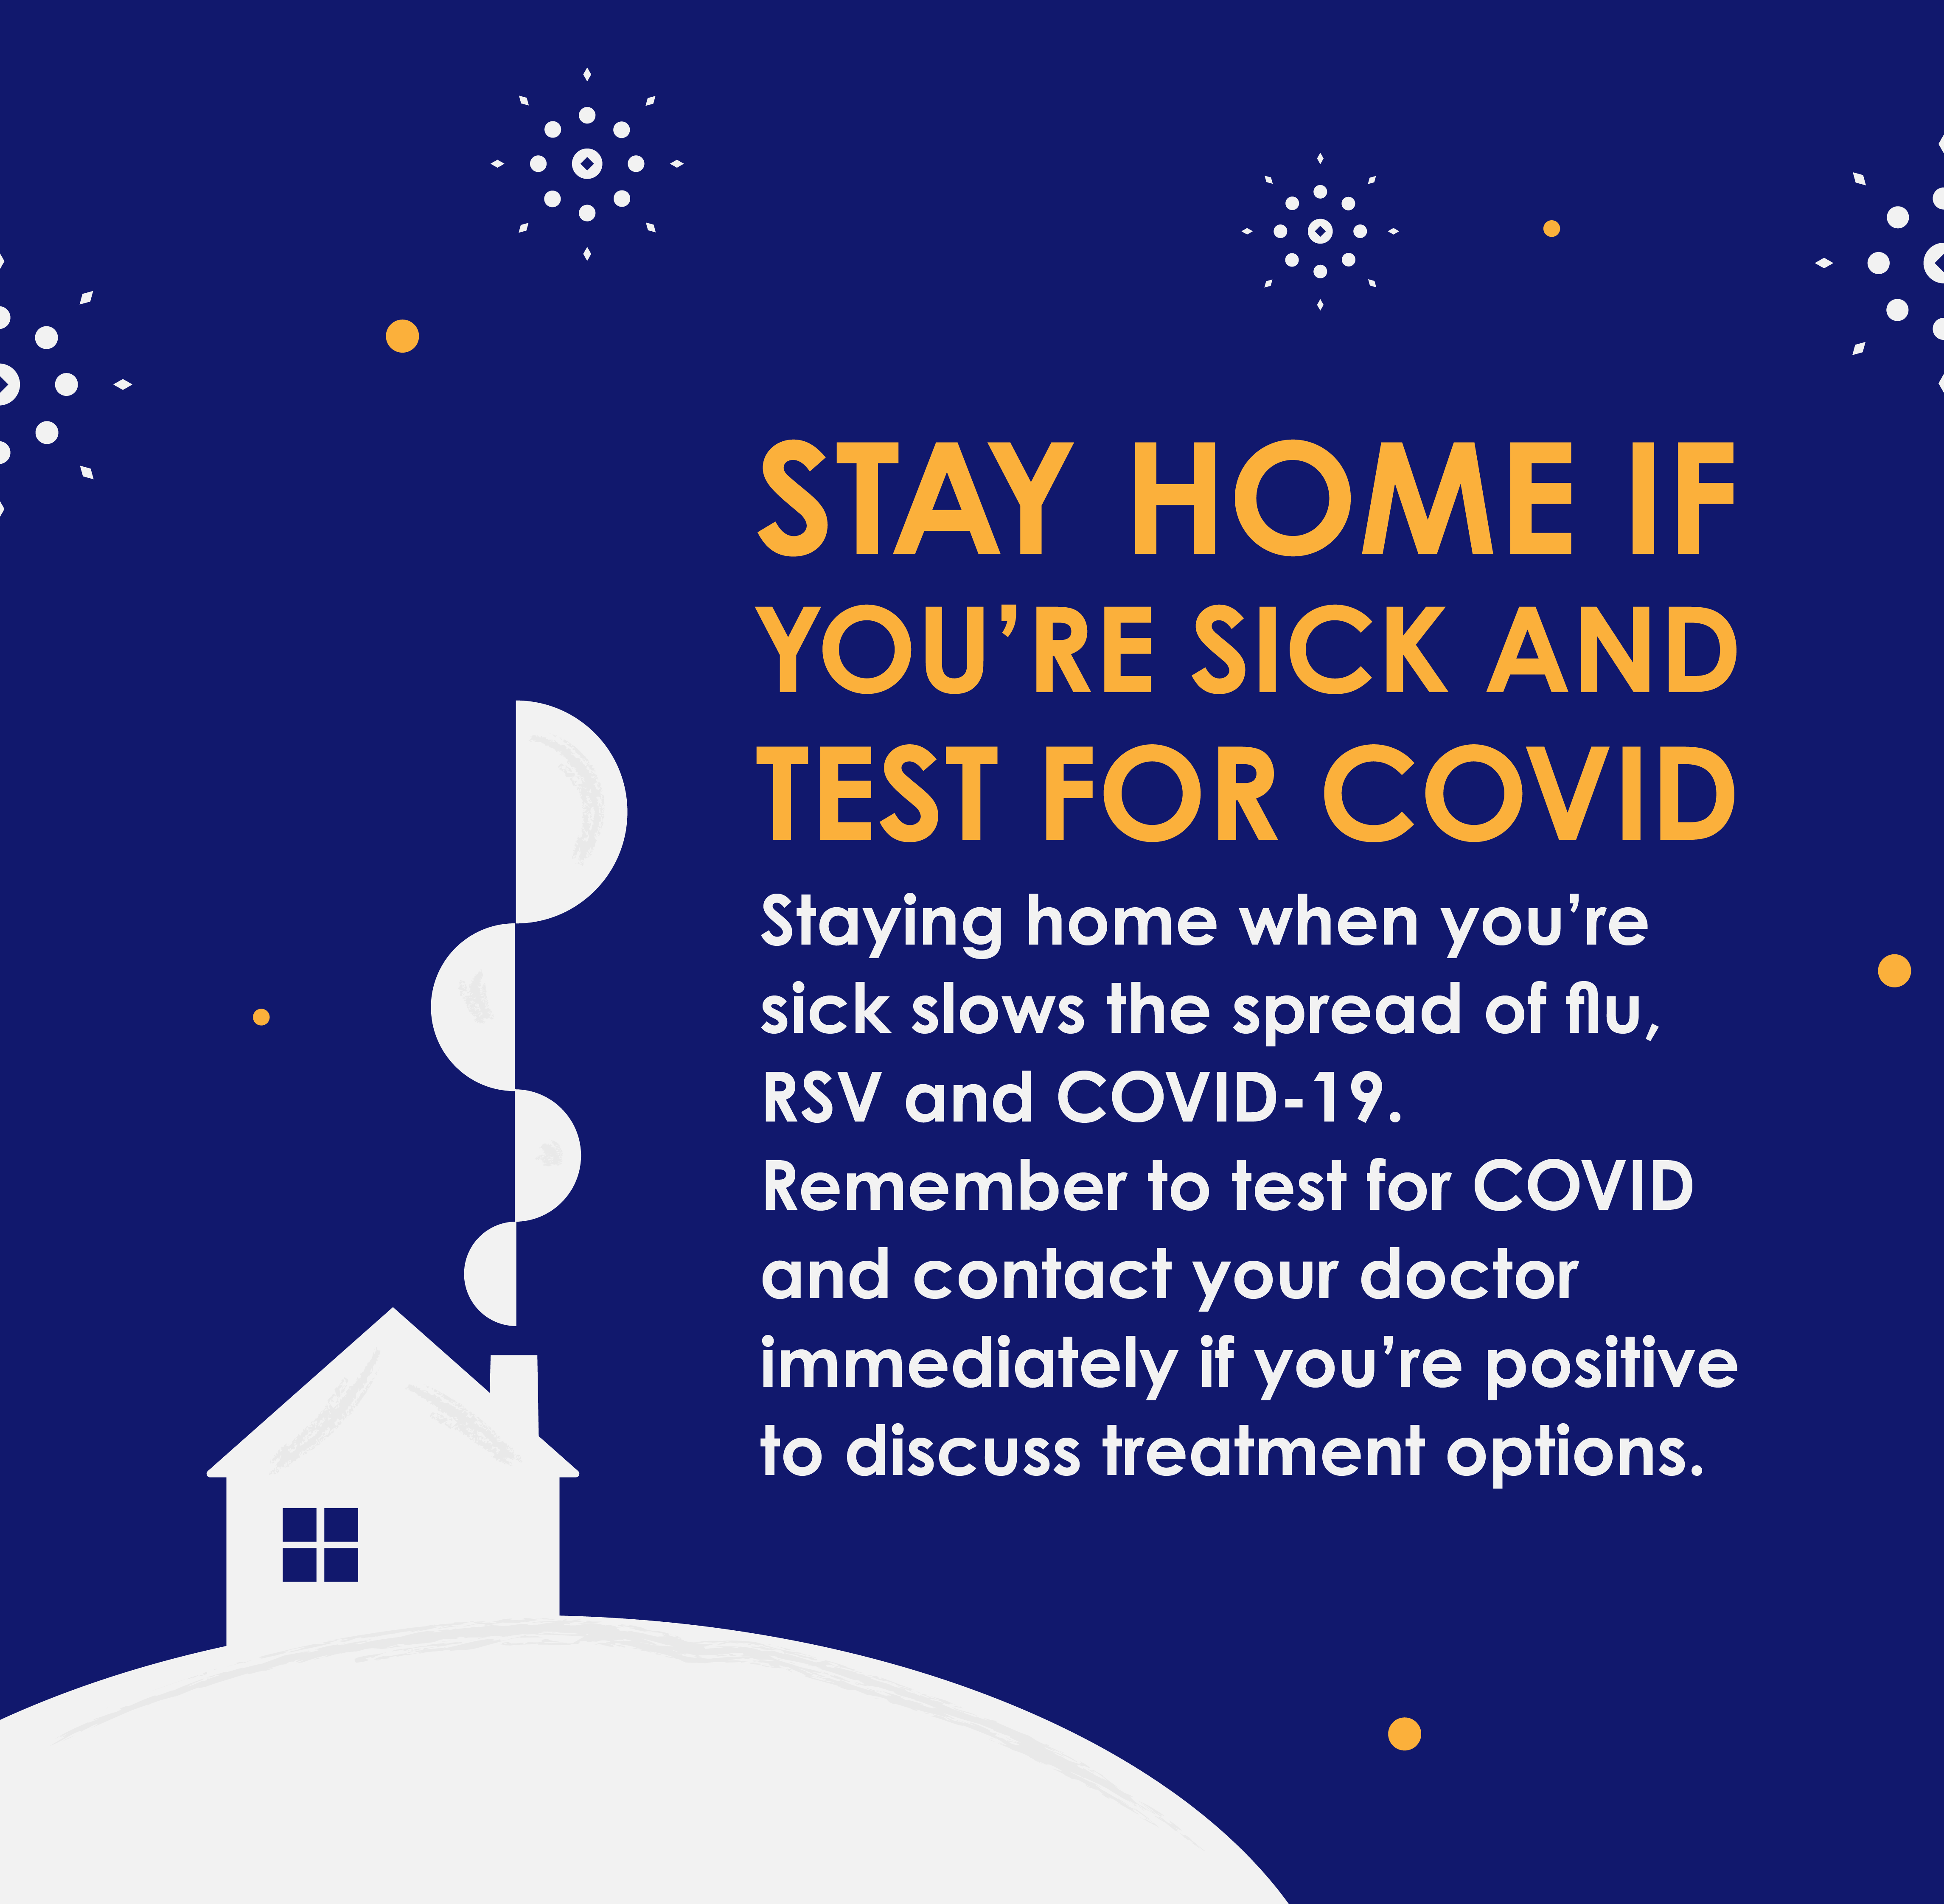 Stay home if you're sick and test for COVID